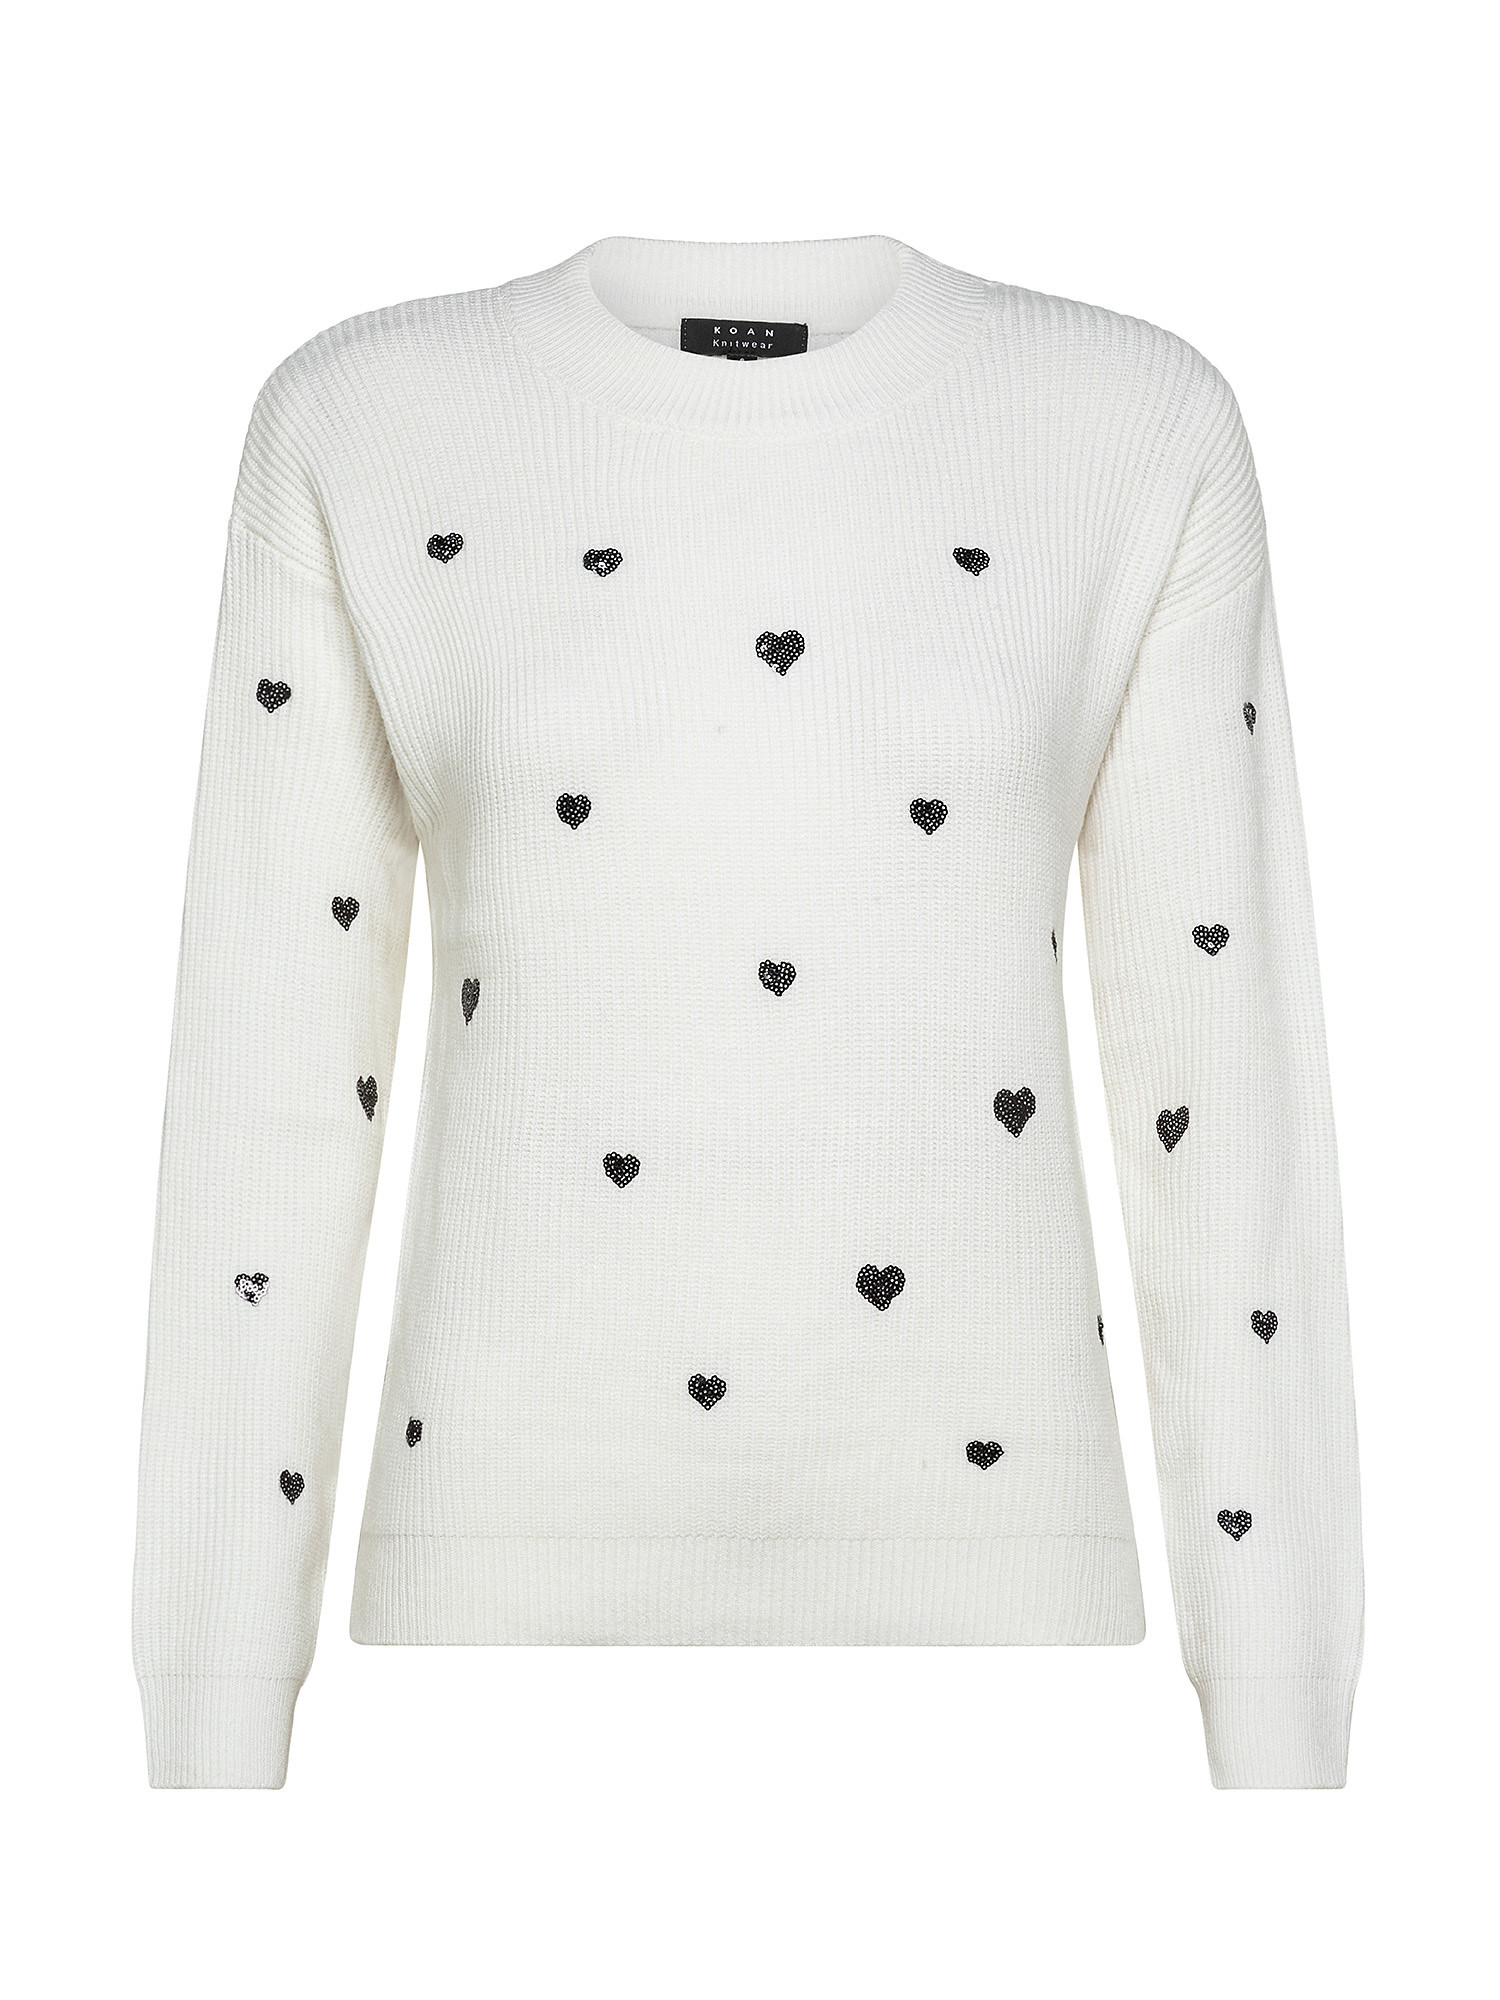 Sweater with sequined hearts, White, large image number 0